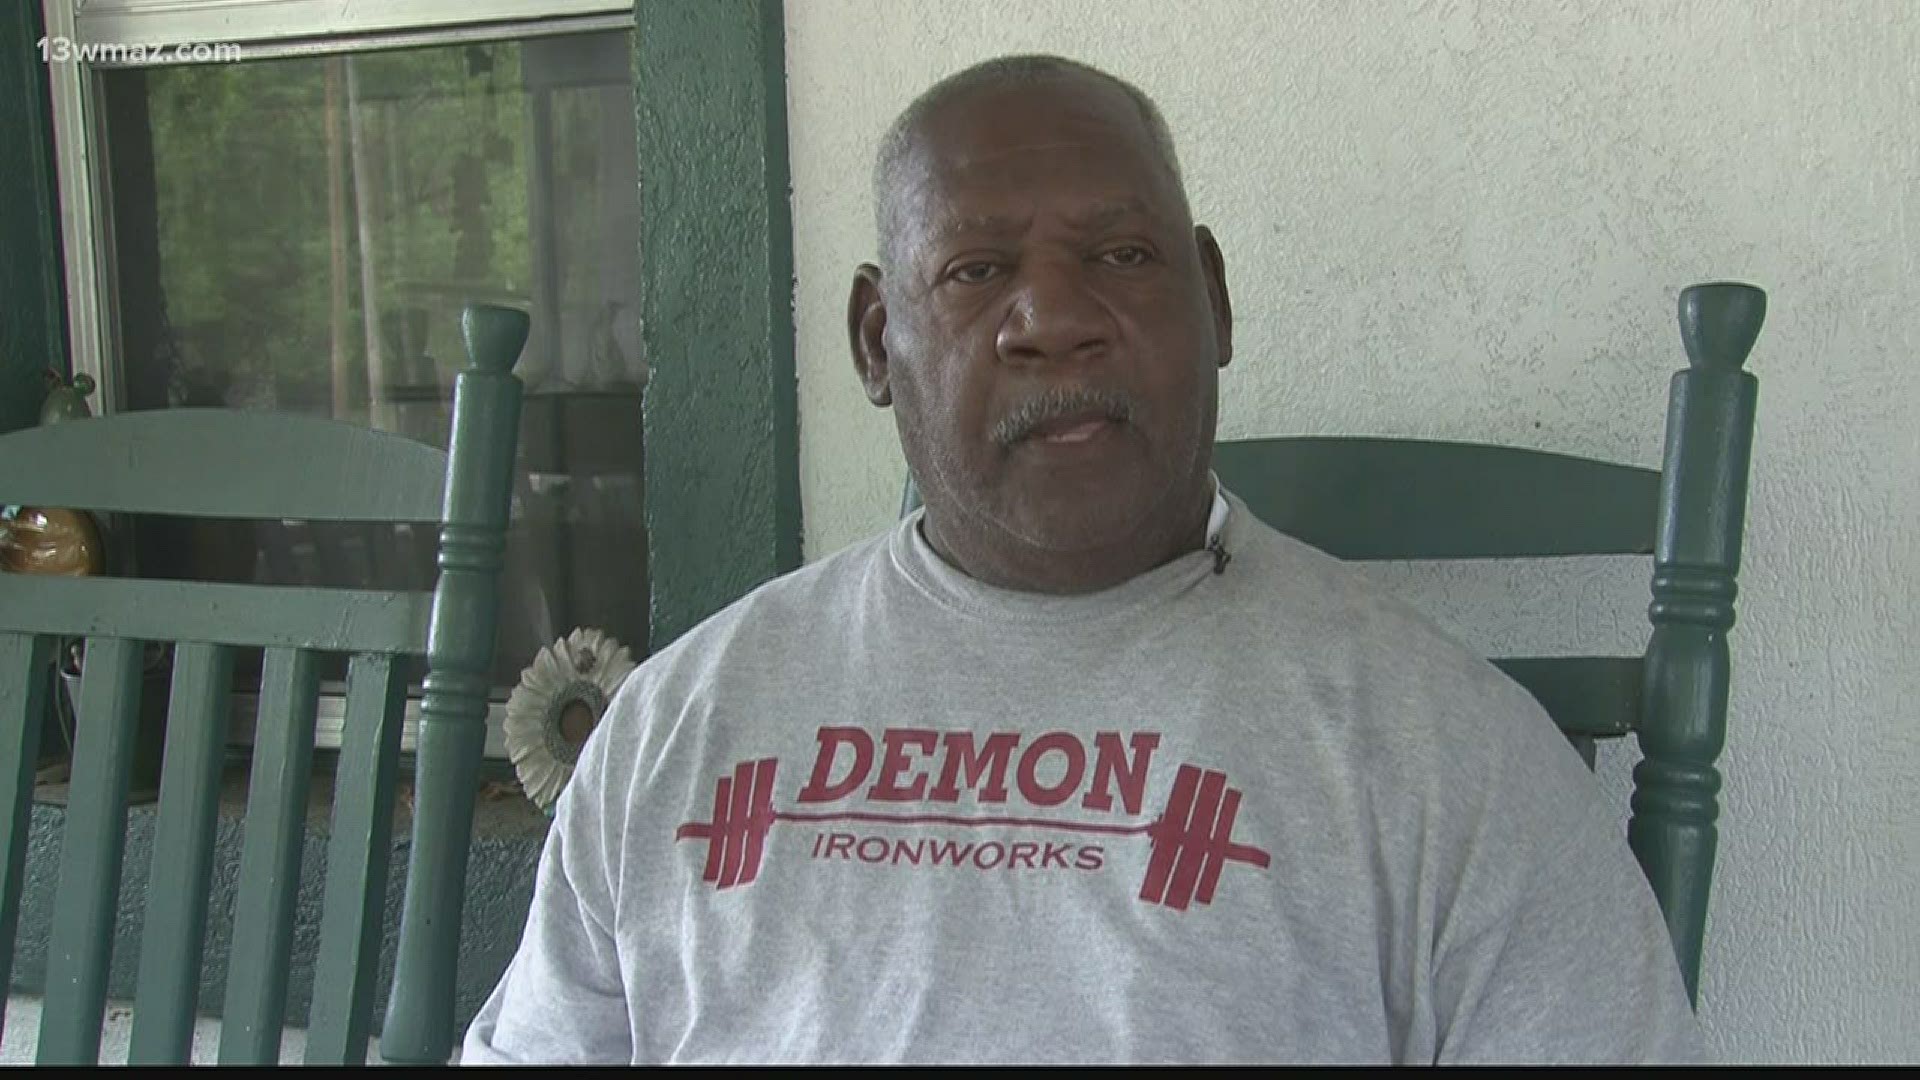 13WMAZ's Marvin James sat down with retired law enforcement officer, former state representative from Warner Robins Willie Talton about his views on race relations